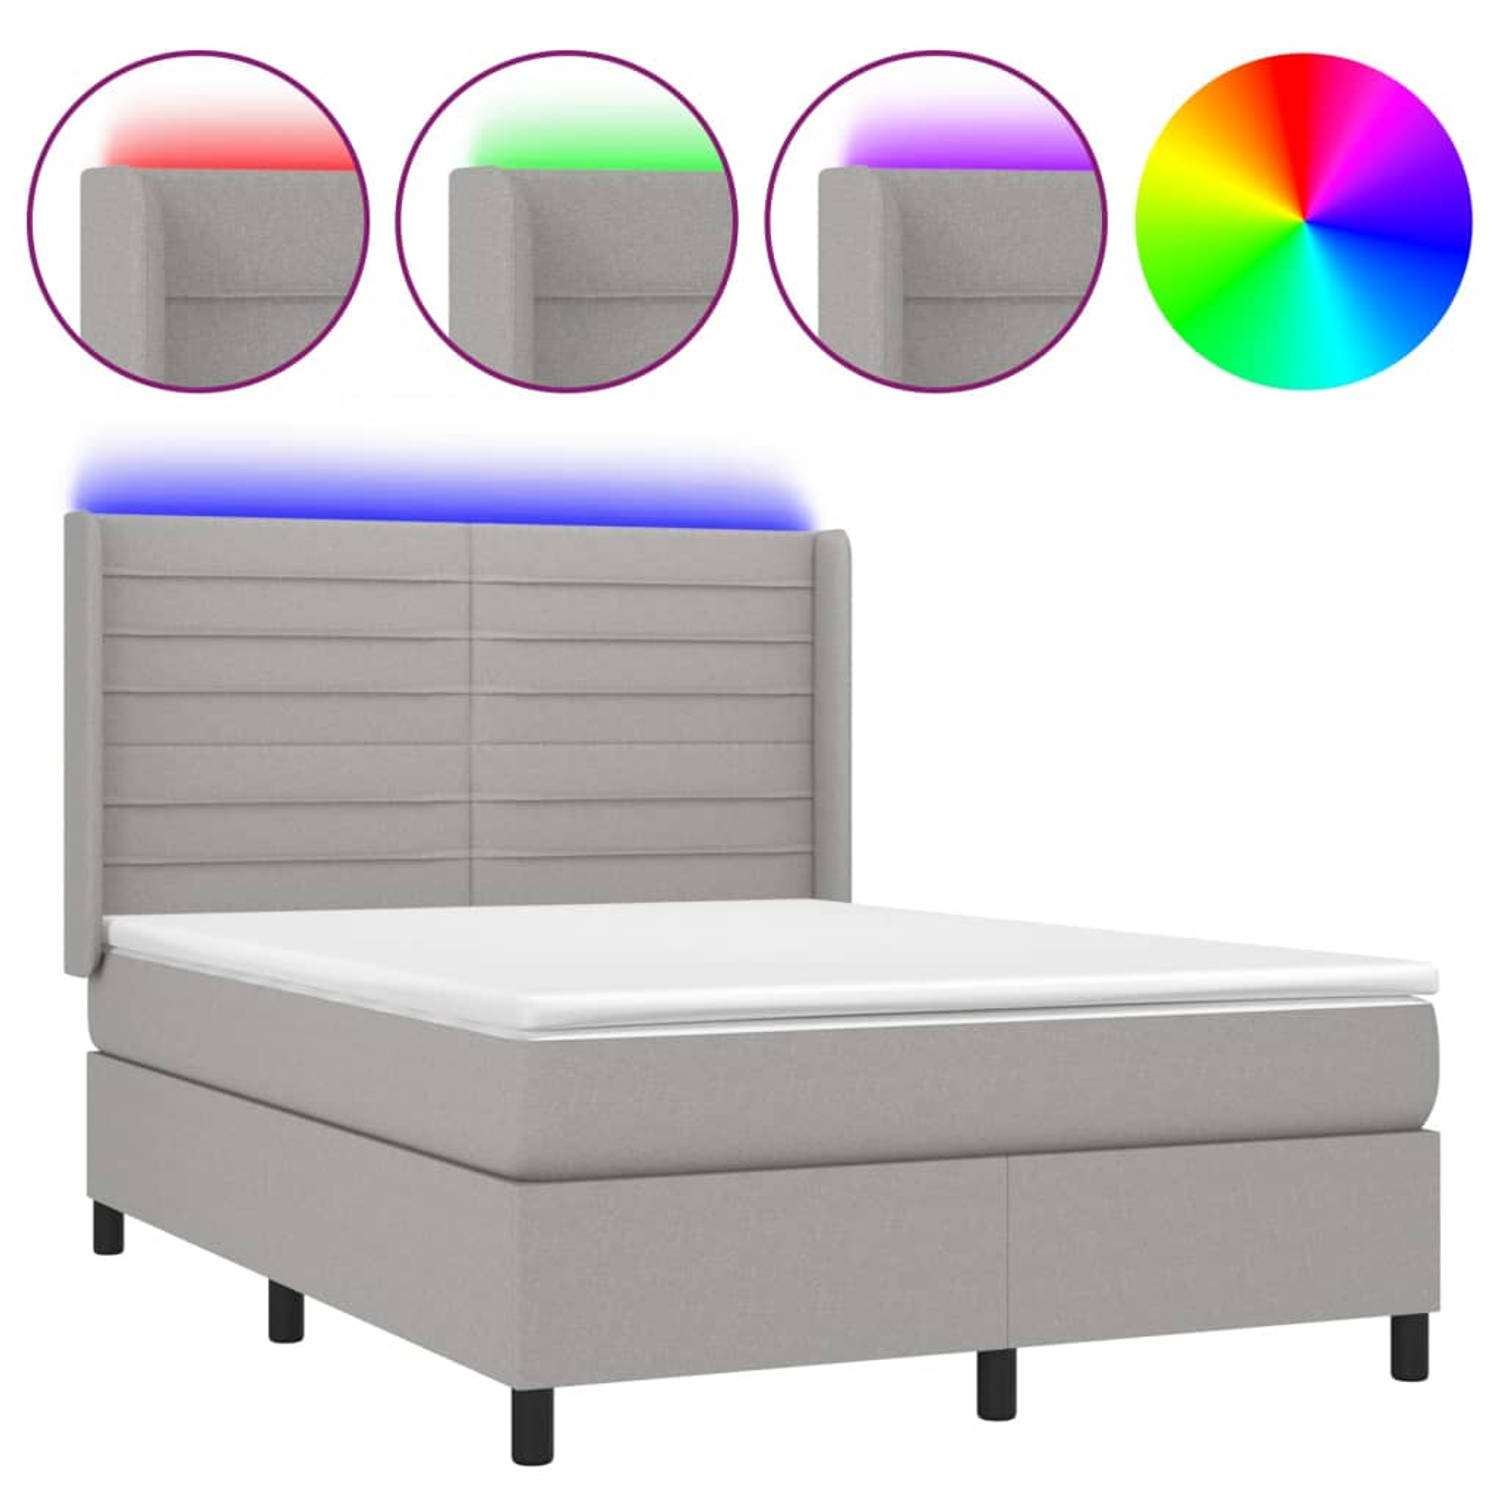 The Living Store Boxspring met matras en LED stof lichtgrijs 140x190 cm - Boxspring - Boxsprings - Bed - Slaapmeubel - Boxspringbed - Boxspring Bed - Tweepersoonsbed - Bed Met Matr